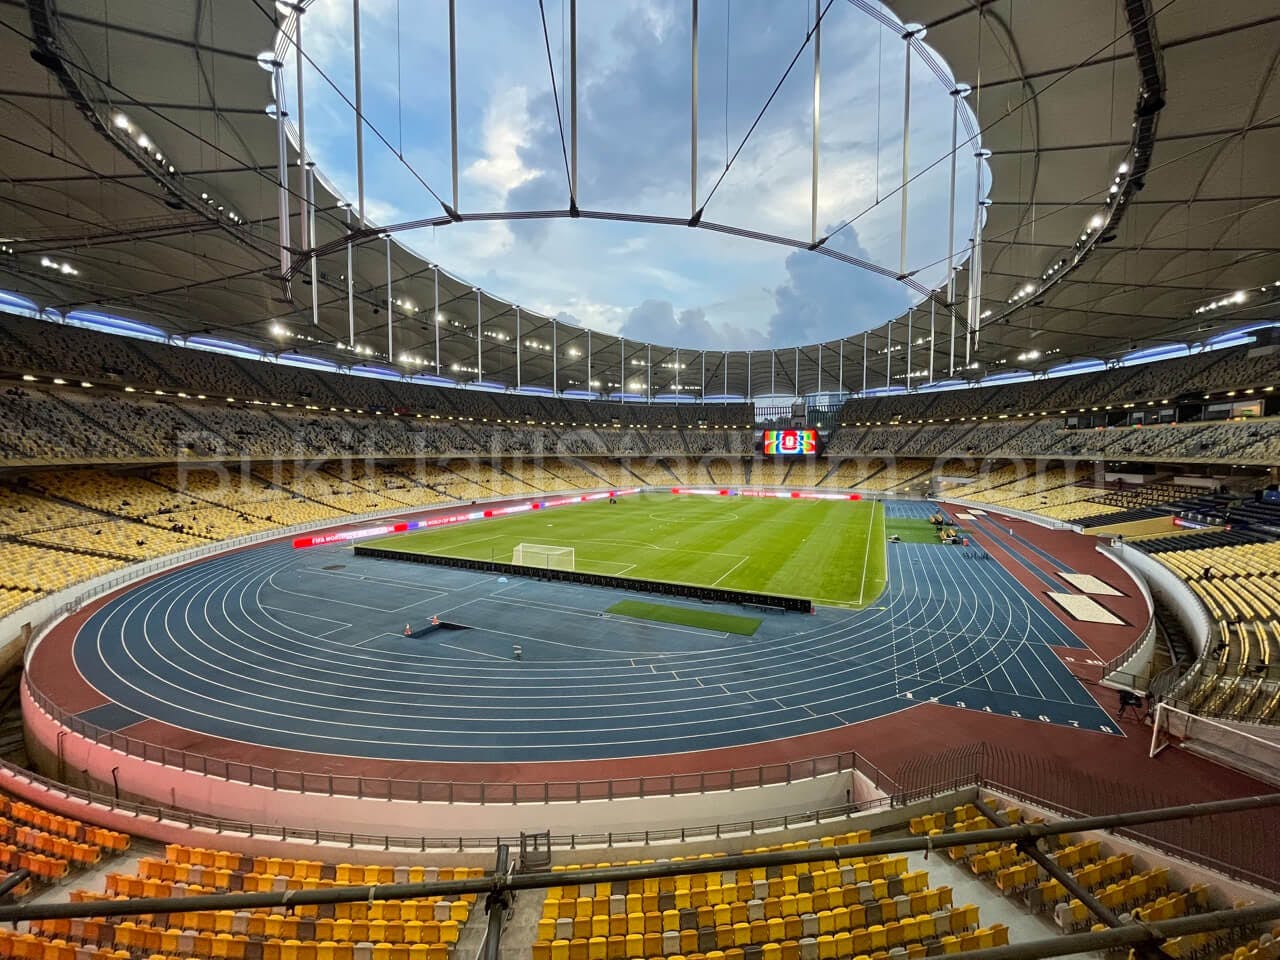 0.5x View of Bukit Jalil field from section 202 of Stadium Bukit Jalil.